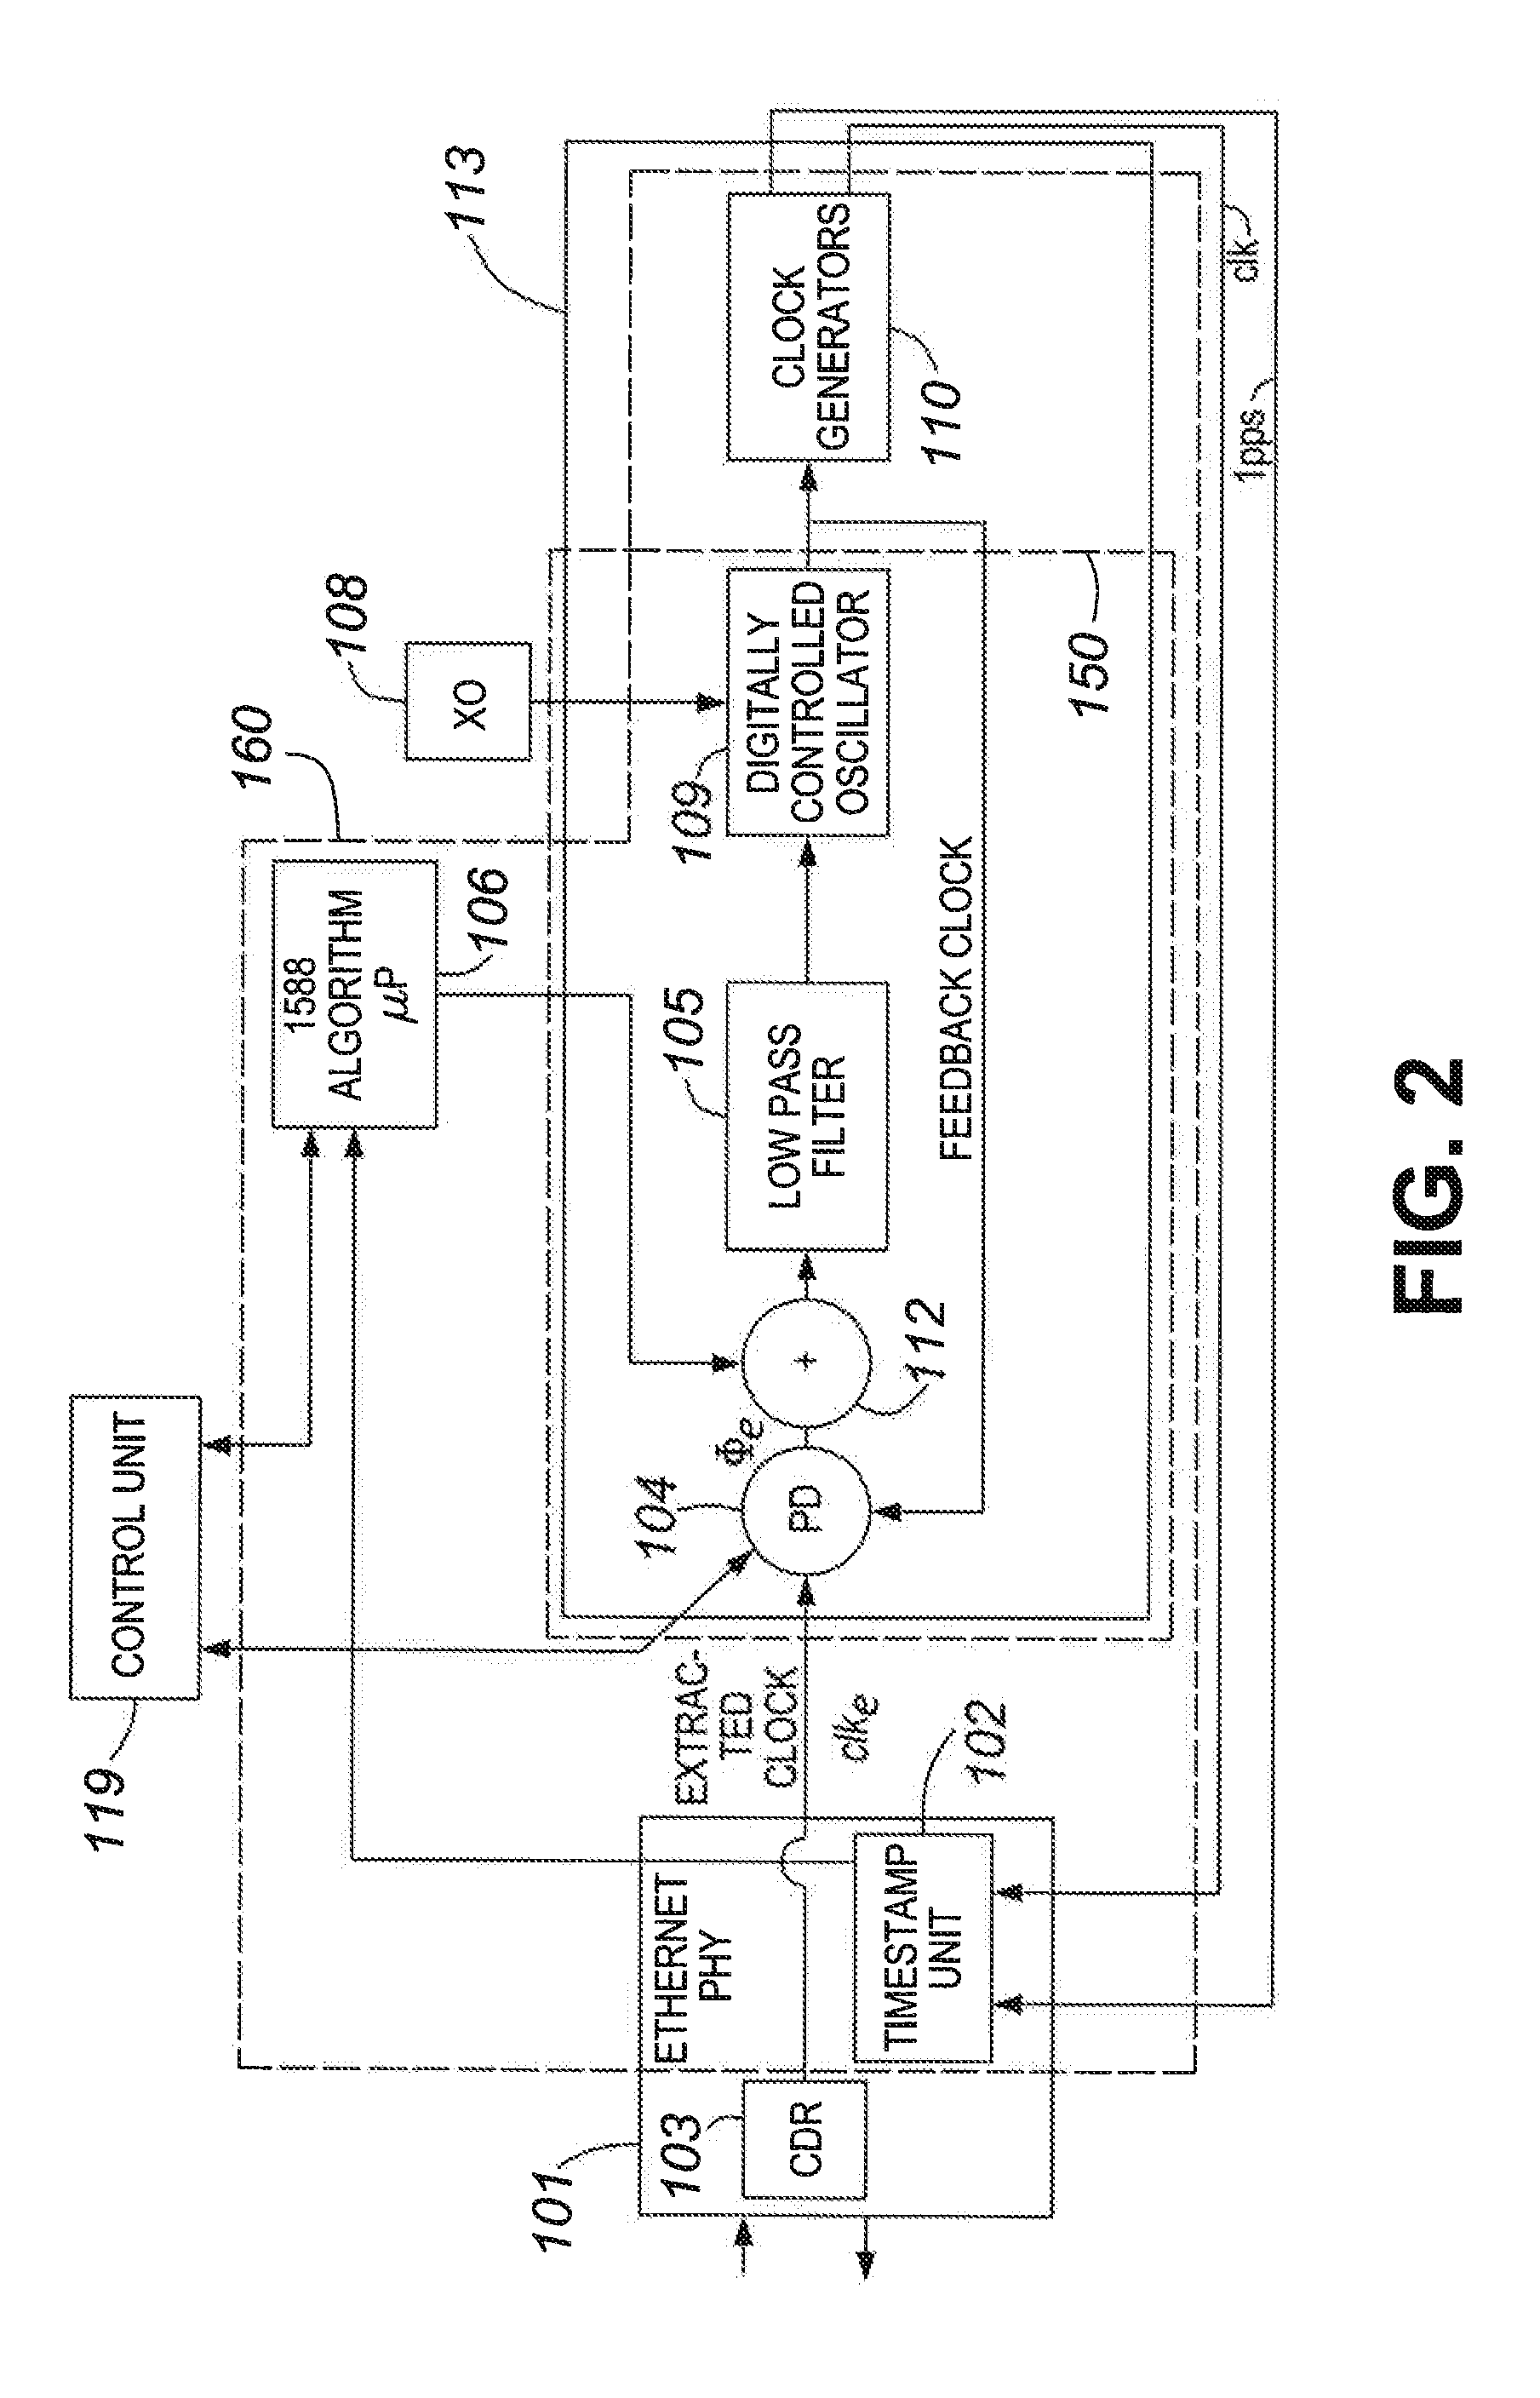 Double phase-locked loop with frequency stabilization